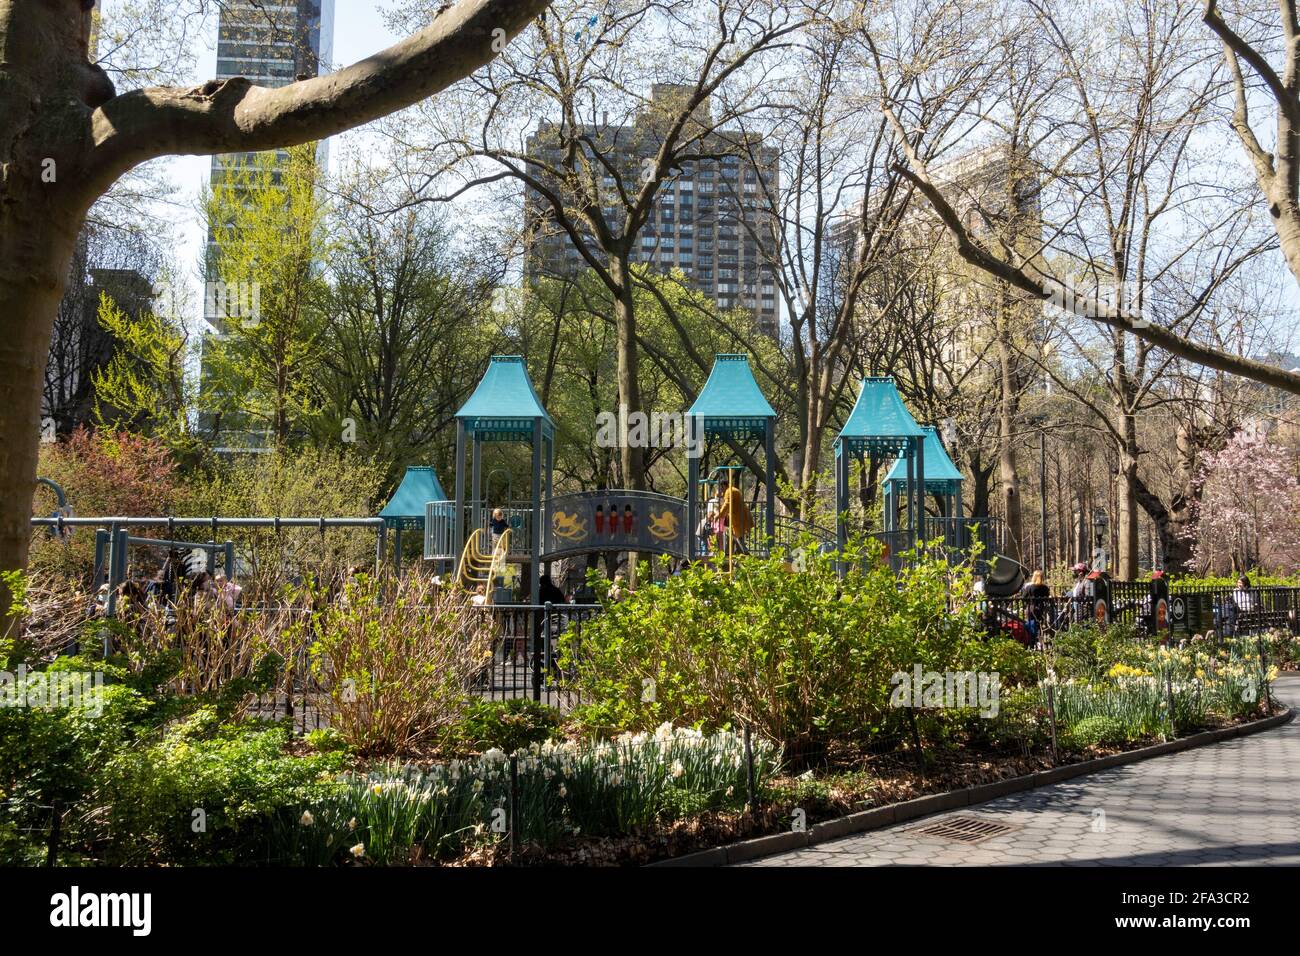 Police Officer Moira Ann Smith Playground in Madison Square Park, NYC Stock Photo